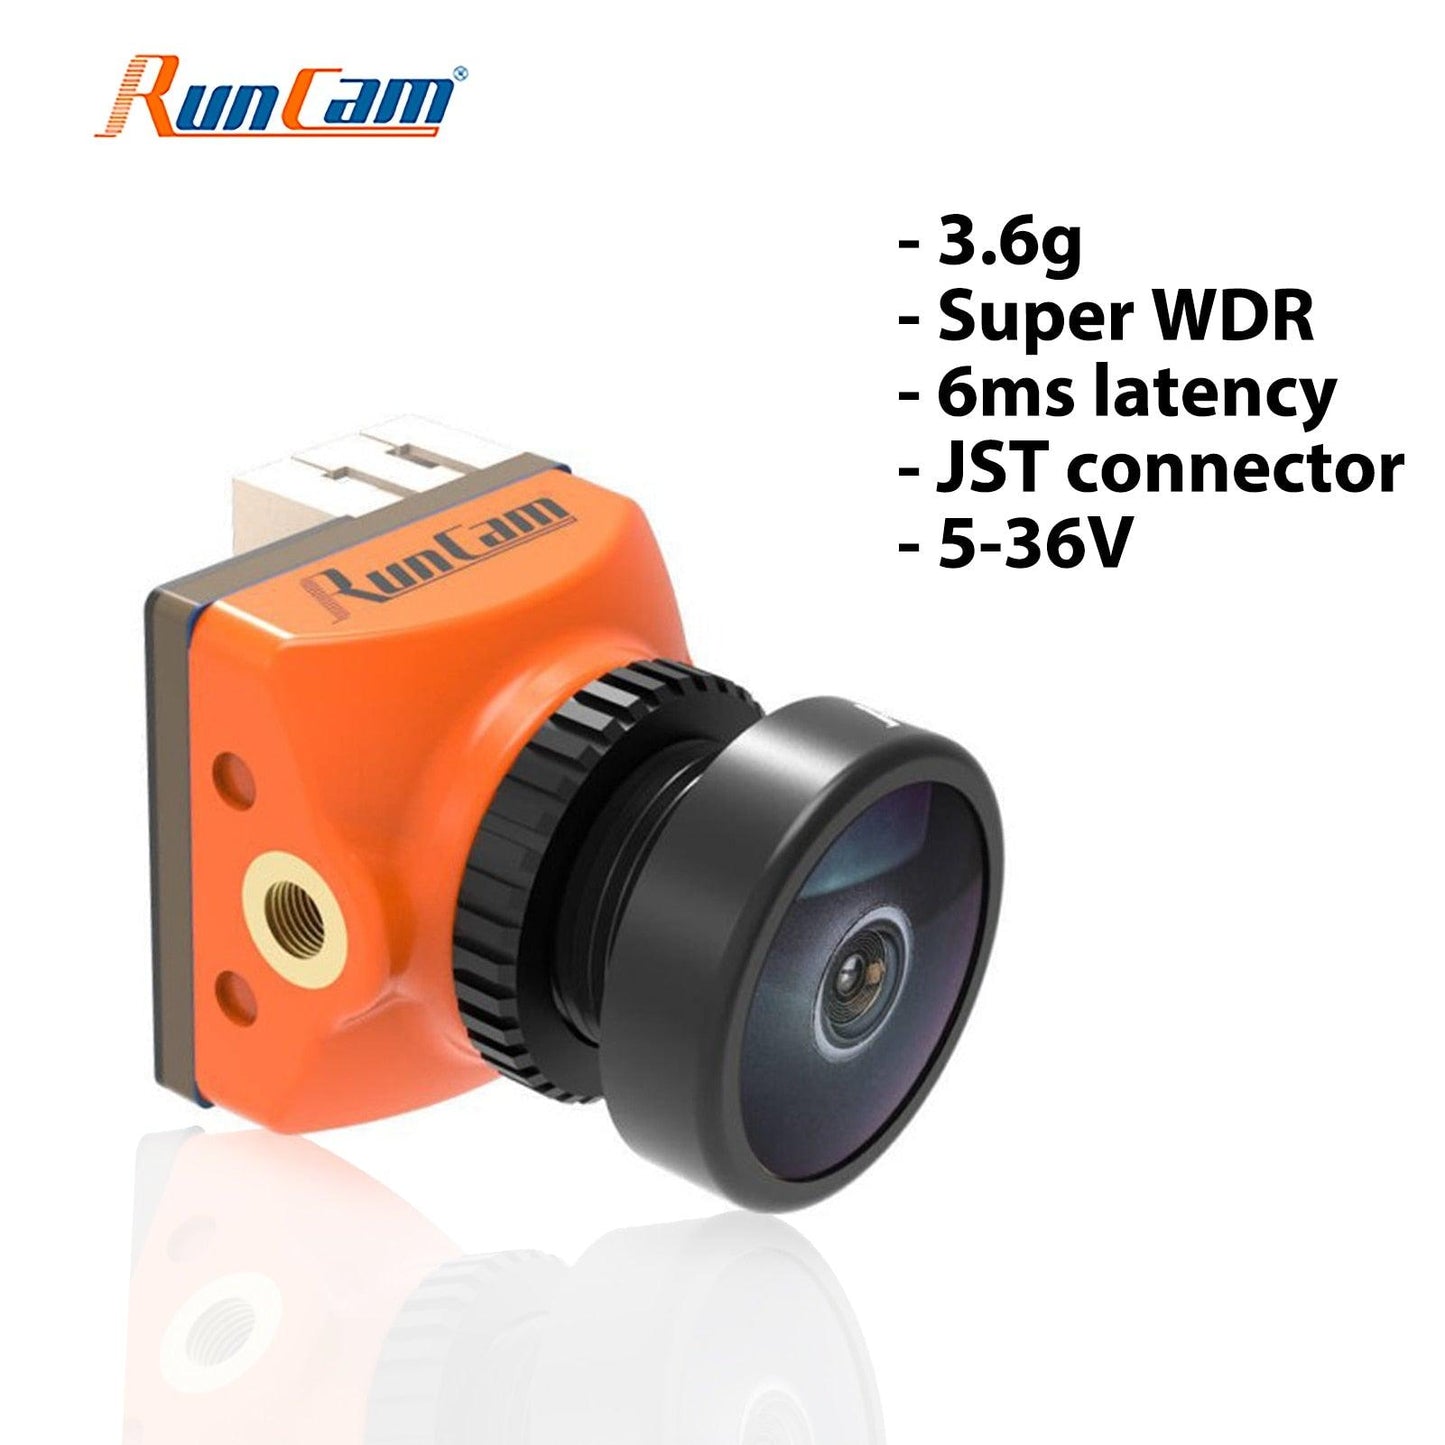 RunCam Racer Nano 2 FPV Camera CMOS OSD 1000TVL Super WDR 6ms Low Latency Gesture Control for Racing Drone - RCDrone